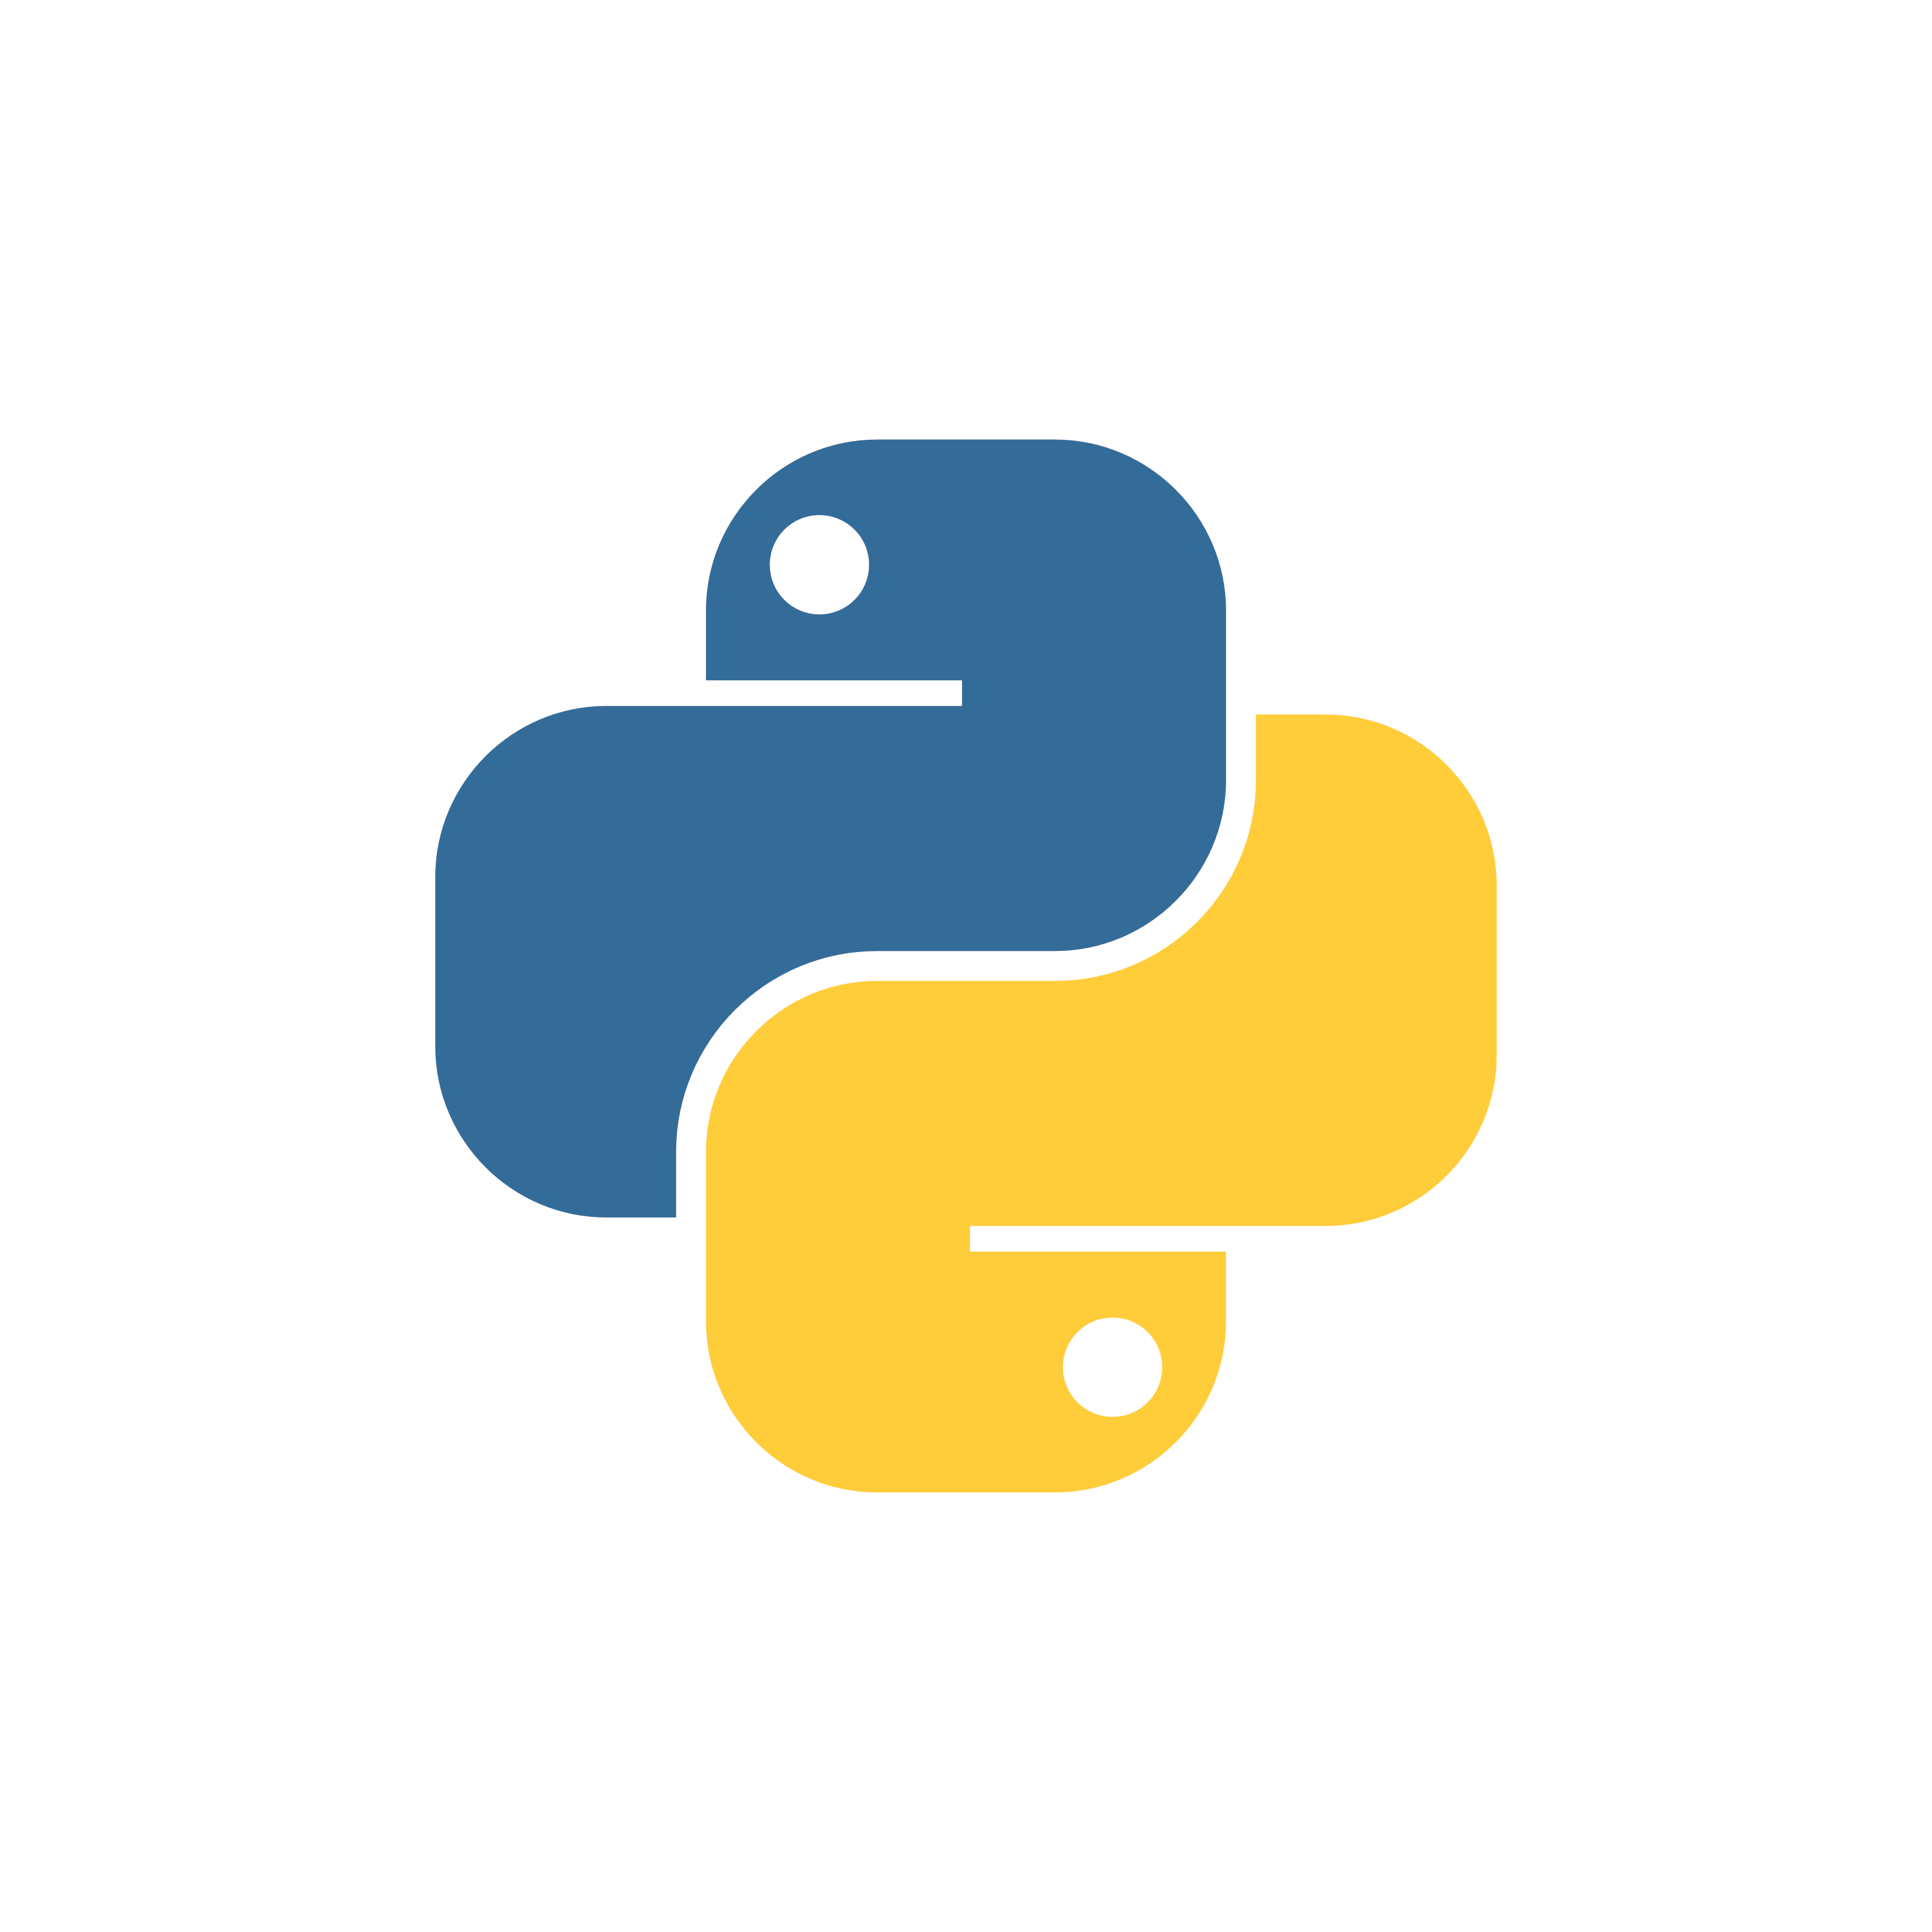 Automating with Python, Wed, Aug 10 9am-4pm PST